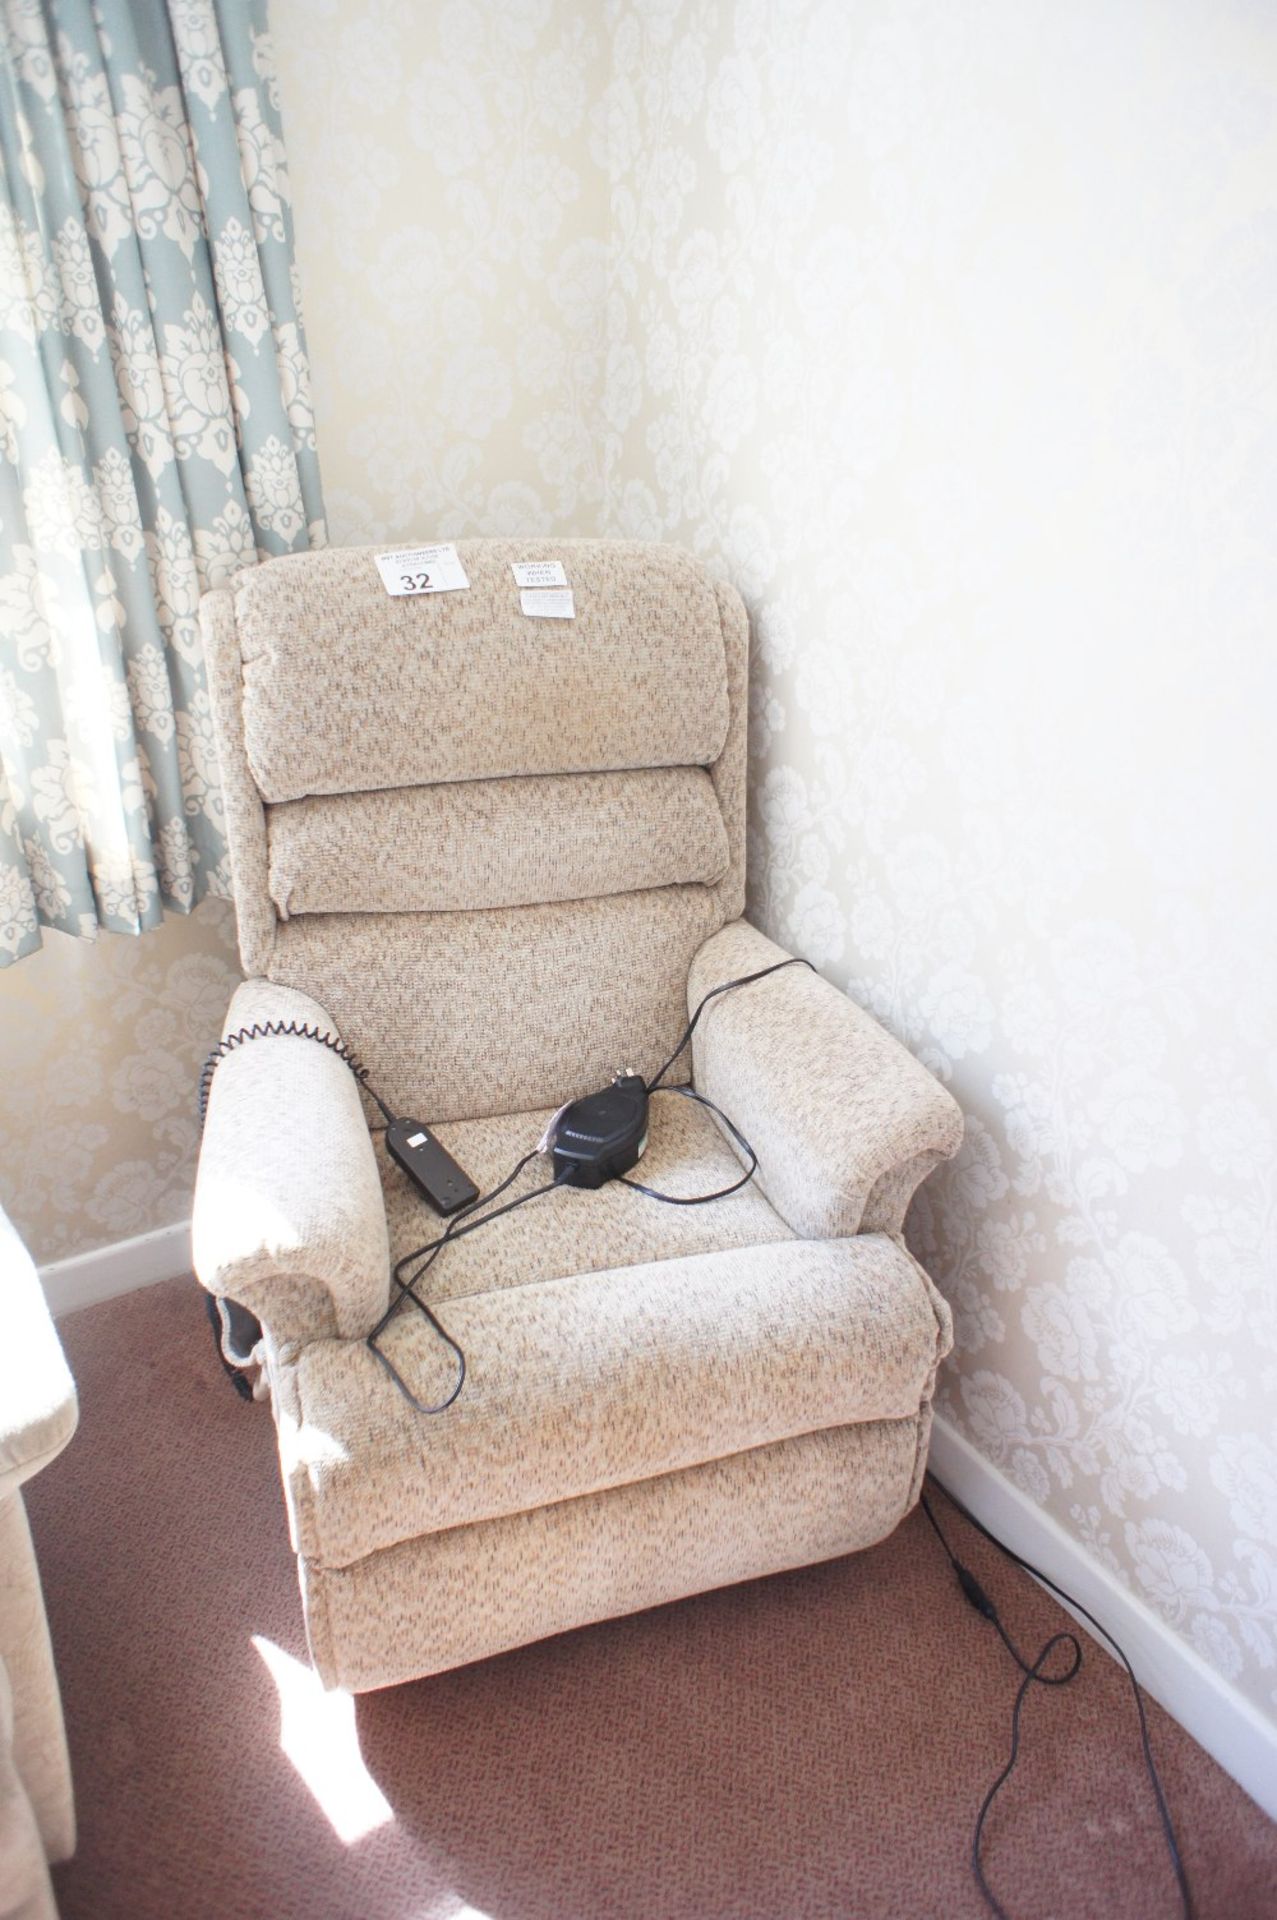 1 fawn upholstered electrically operated recliner chair (located in room 13 Burrow House,